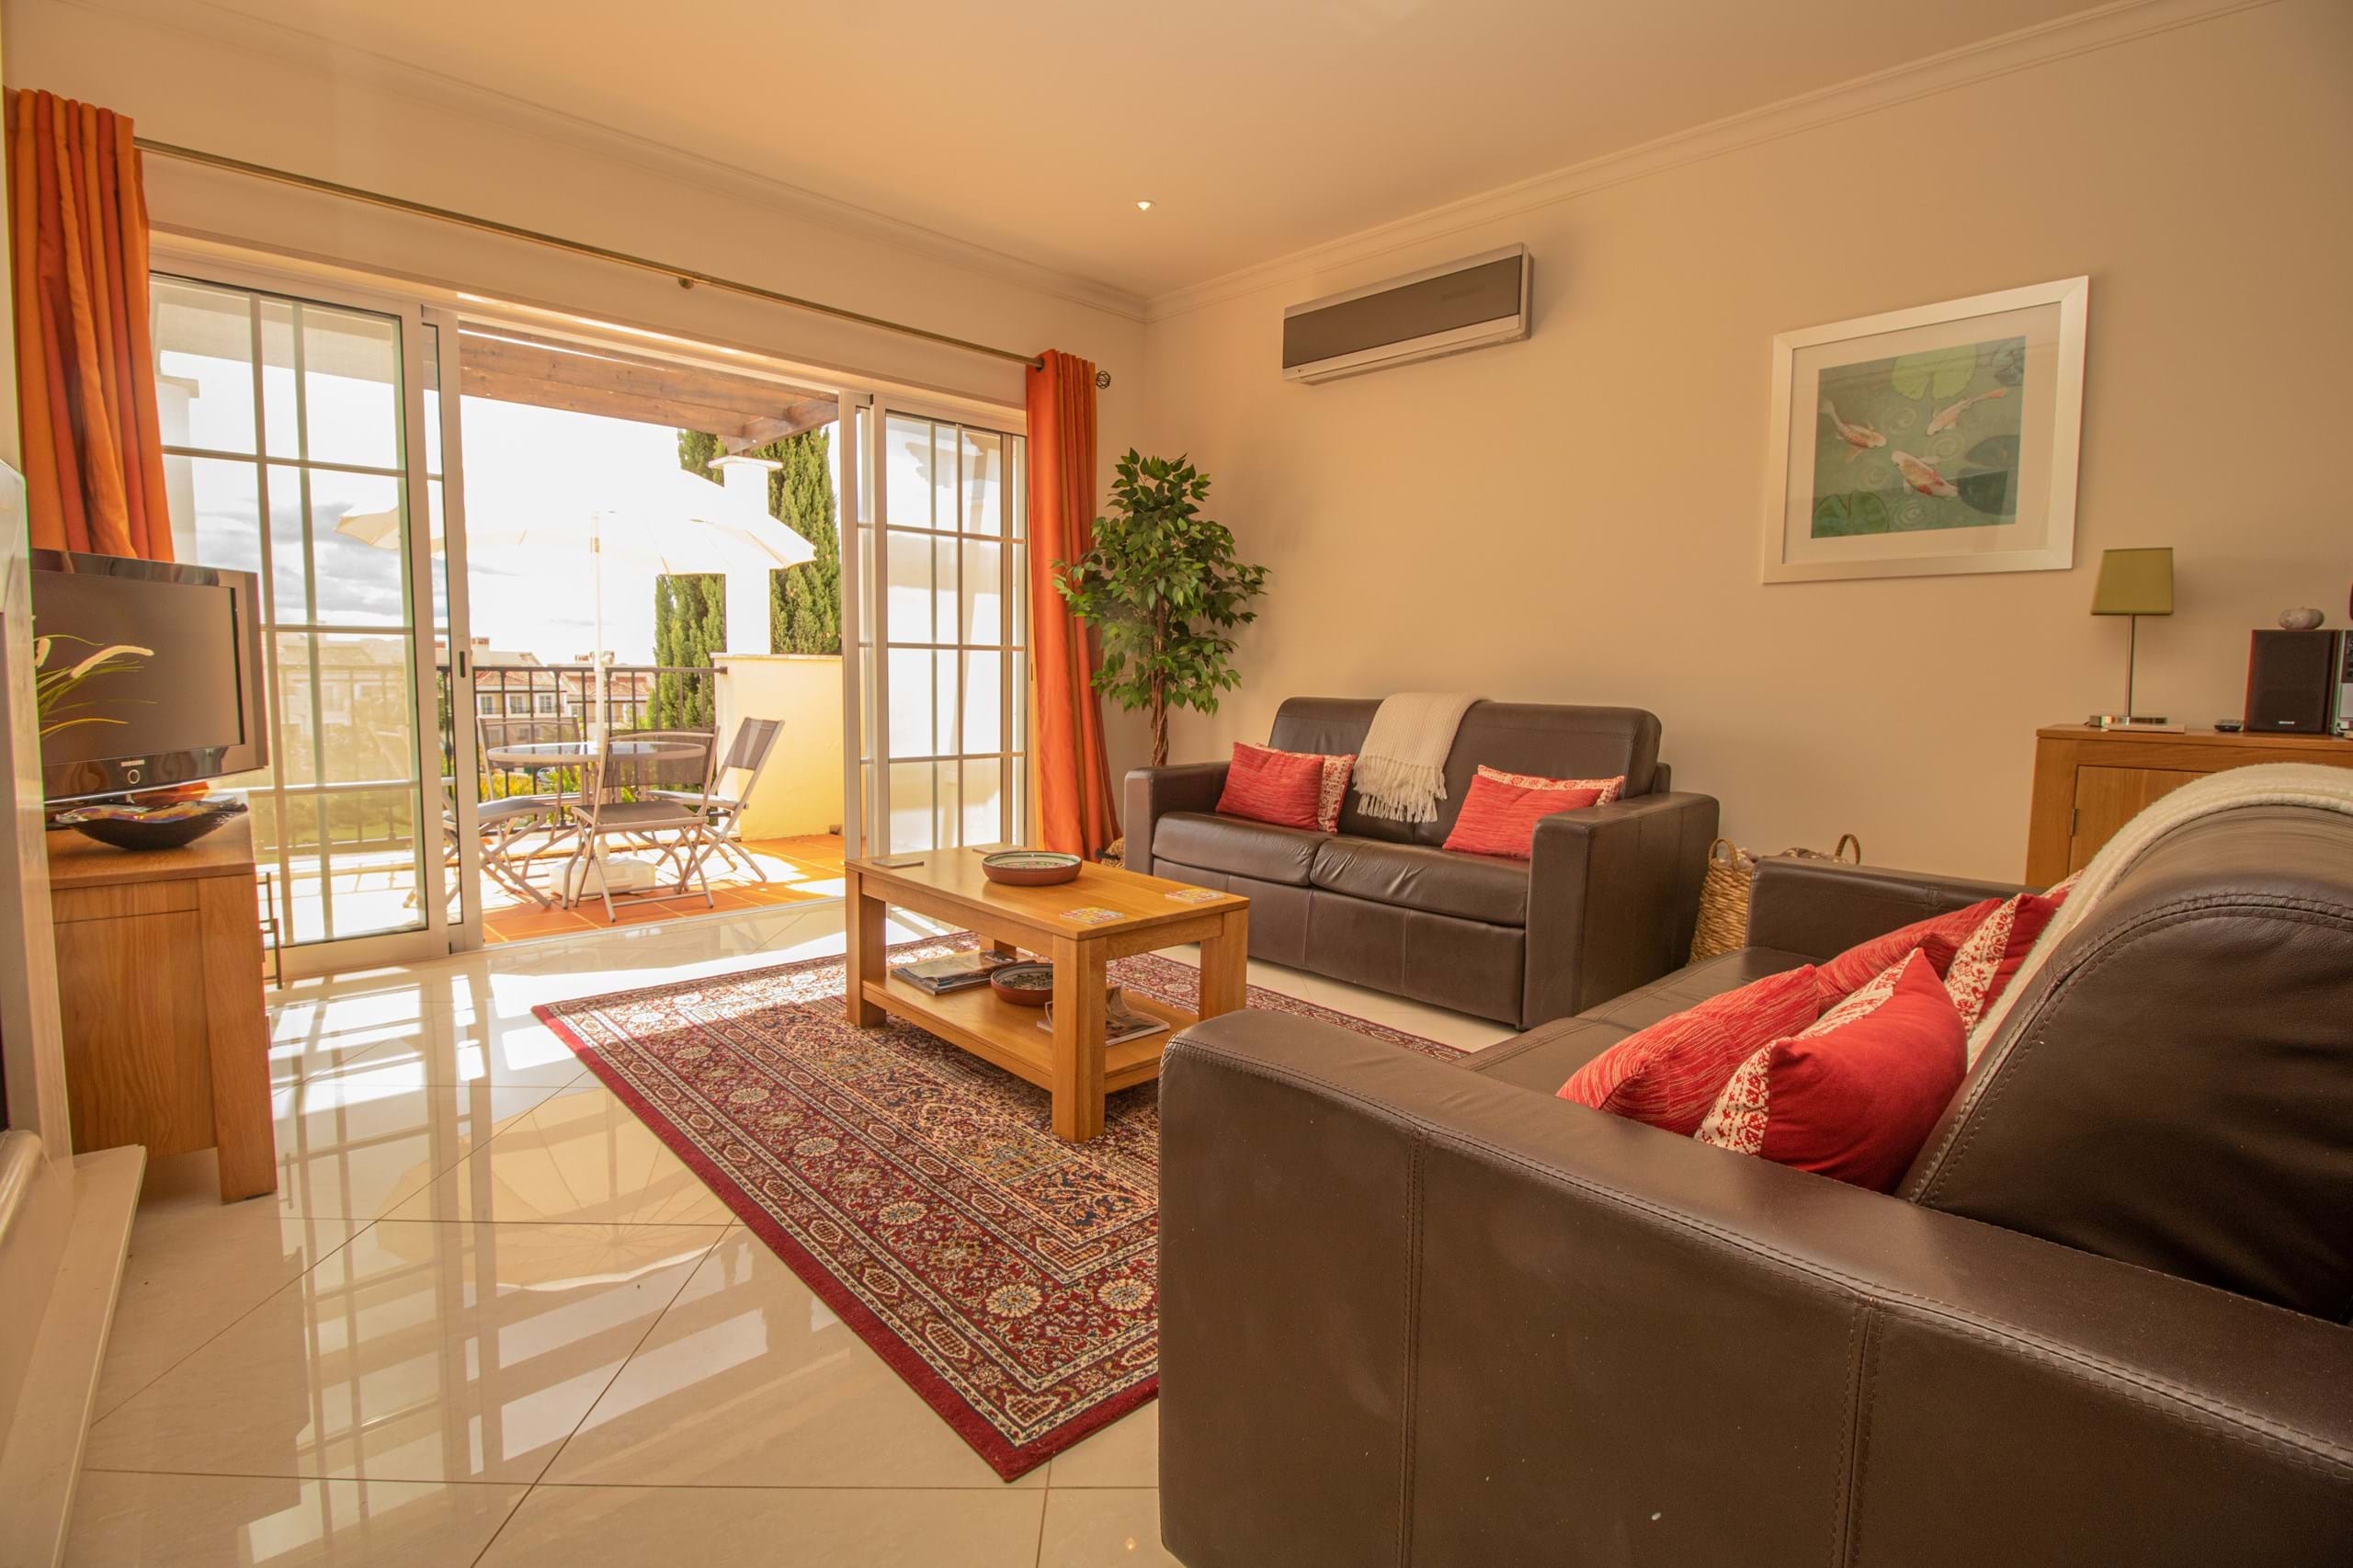 2 bed Apartment For Rent in Vilamoura, Central Algarve - thumb 3